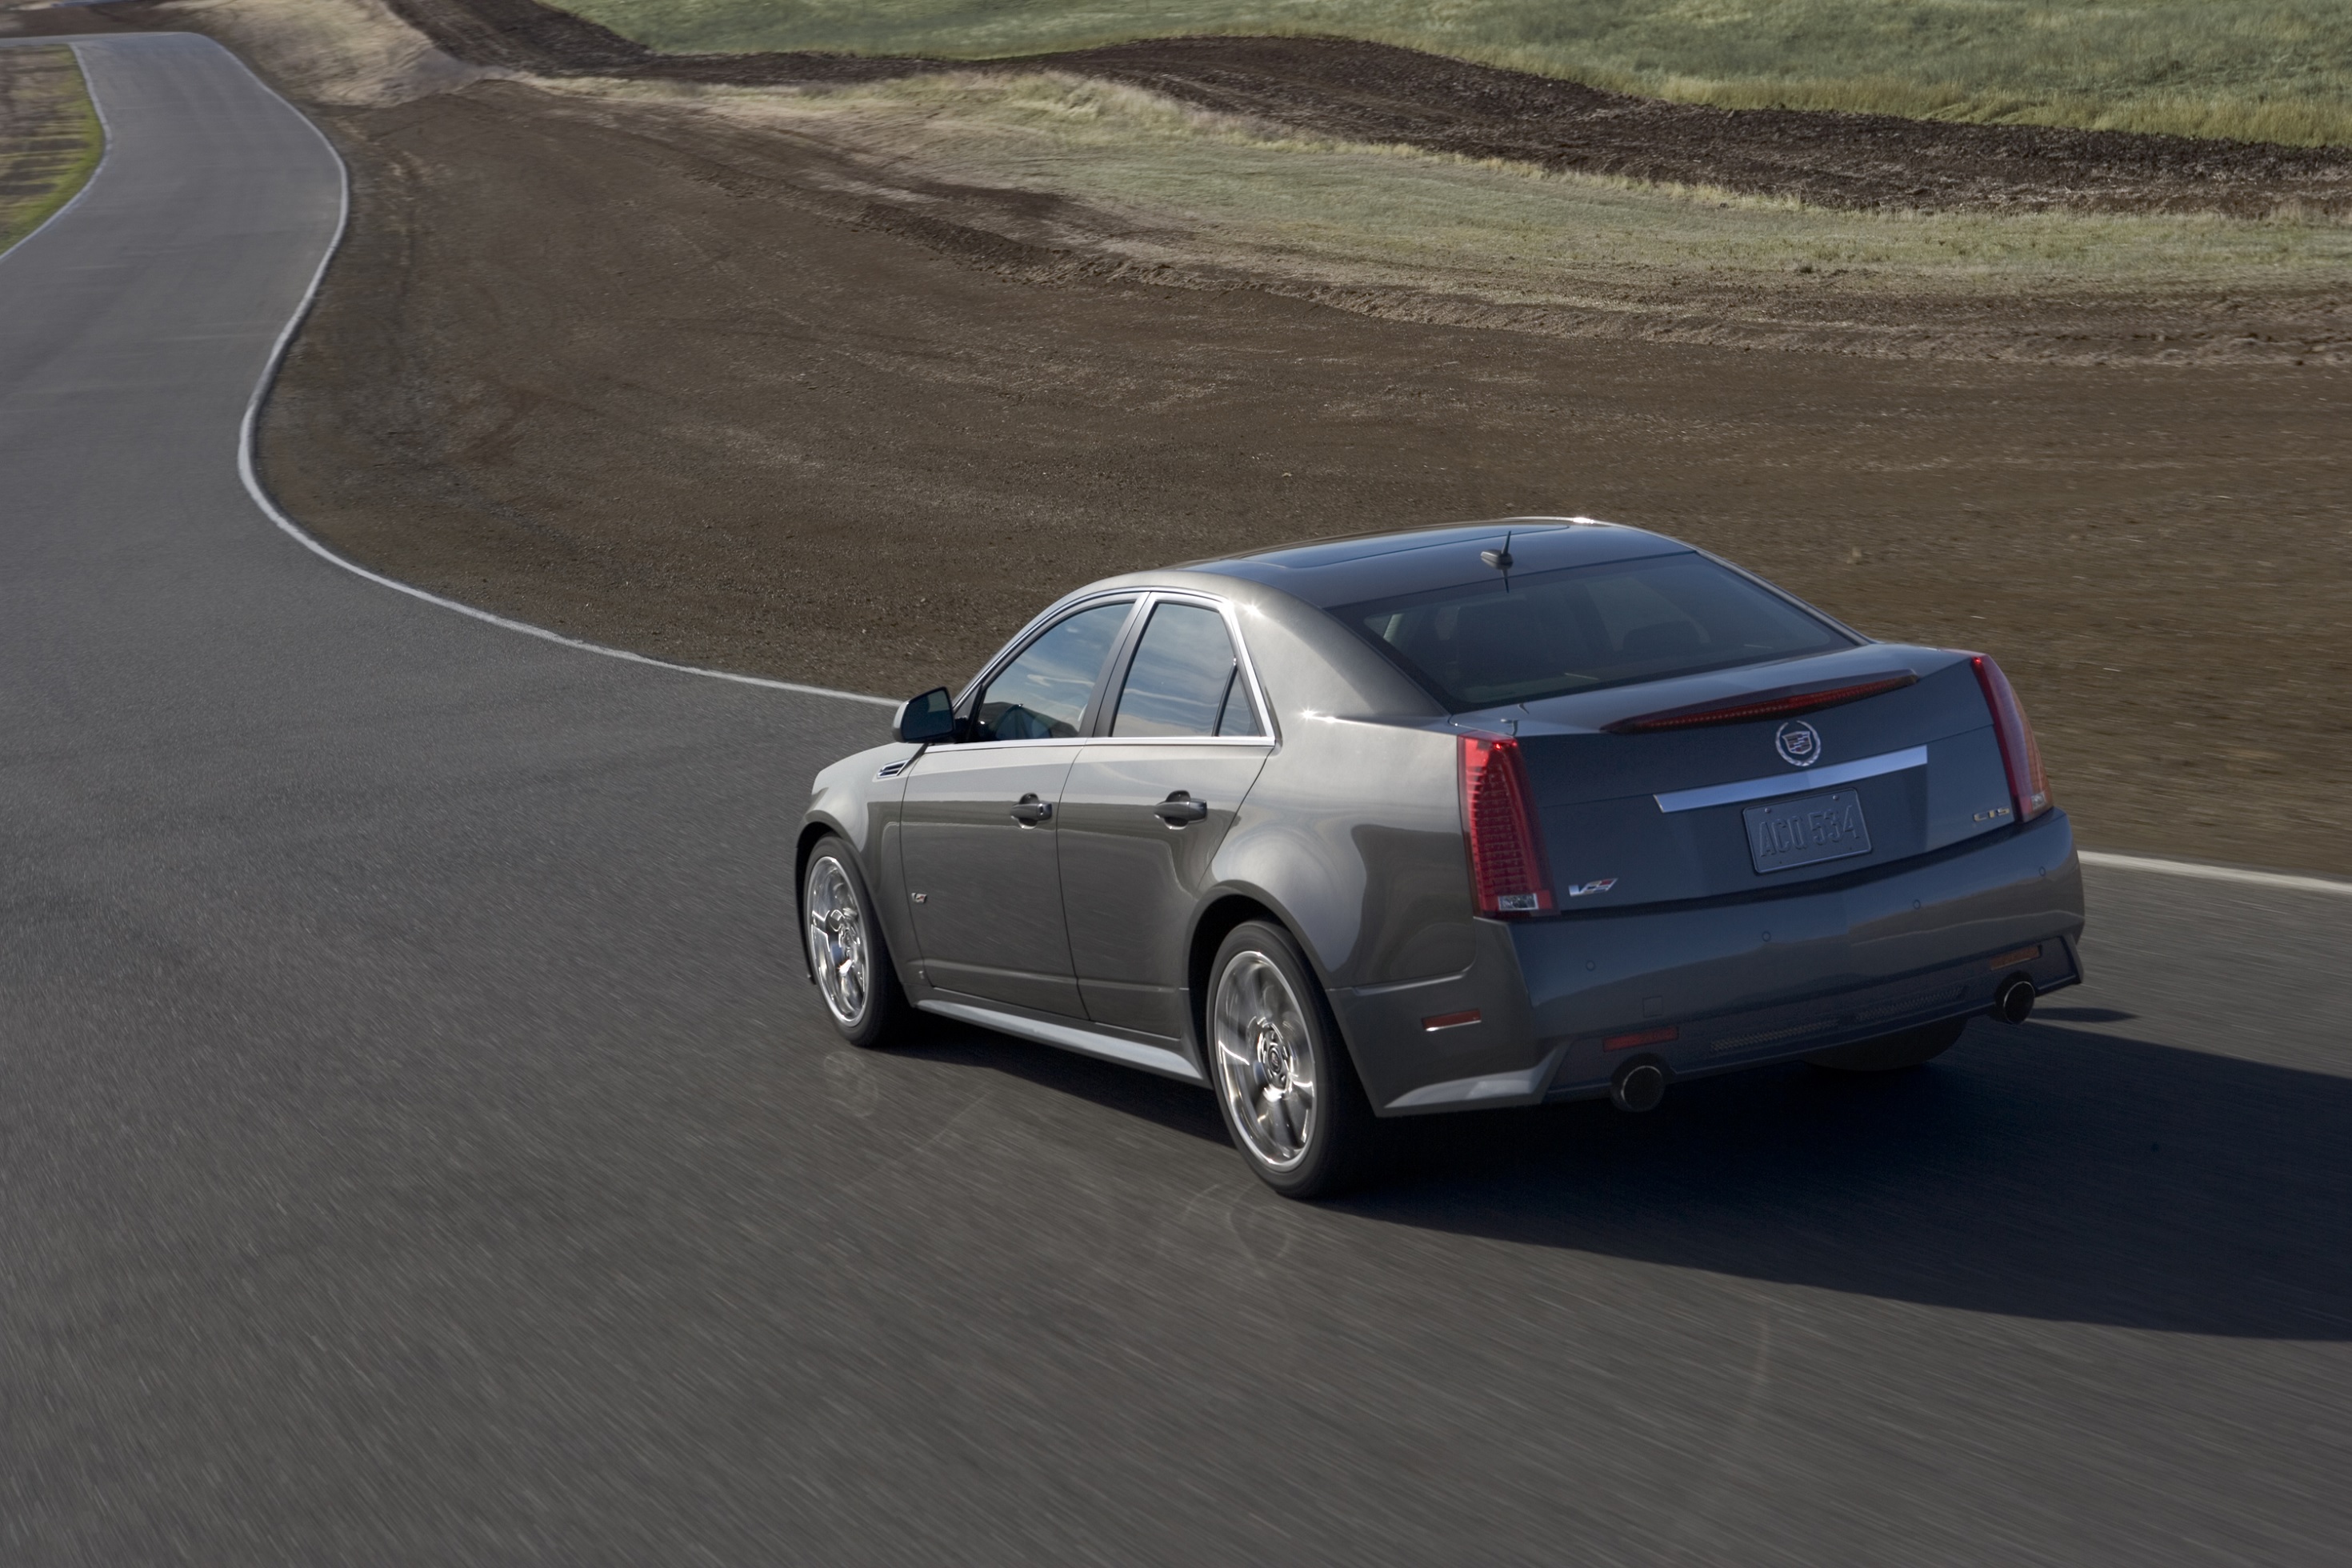 The rear 3/4 view of a gray 2011 Cadillac CTS-V Sedan driving around a racetrack